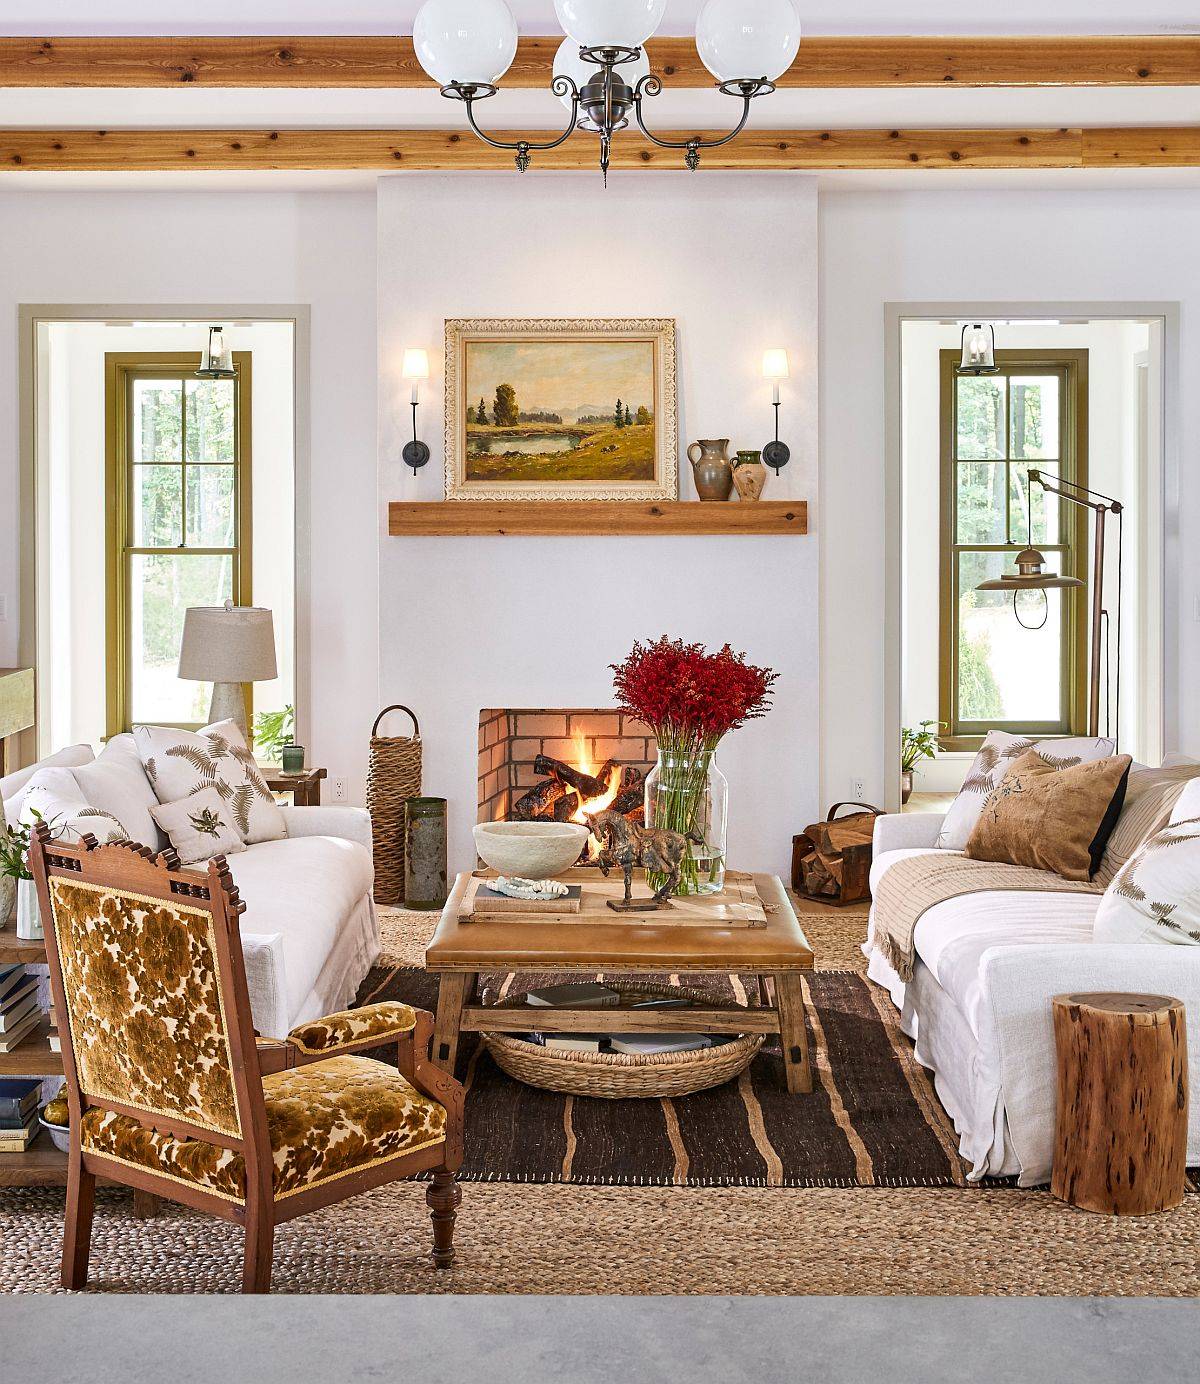 Modern living room with fireplace and wood beams on ceiling 